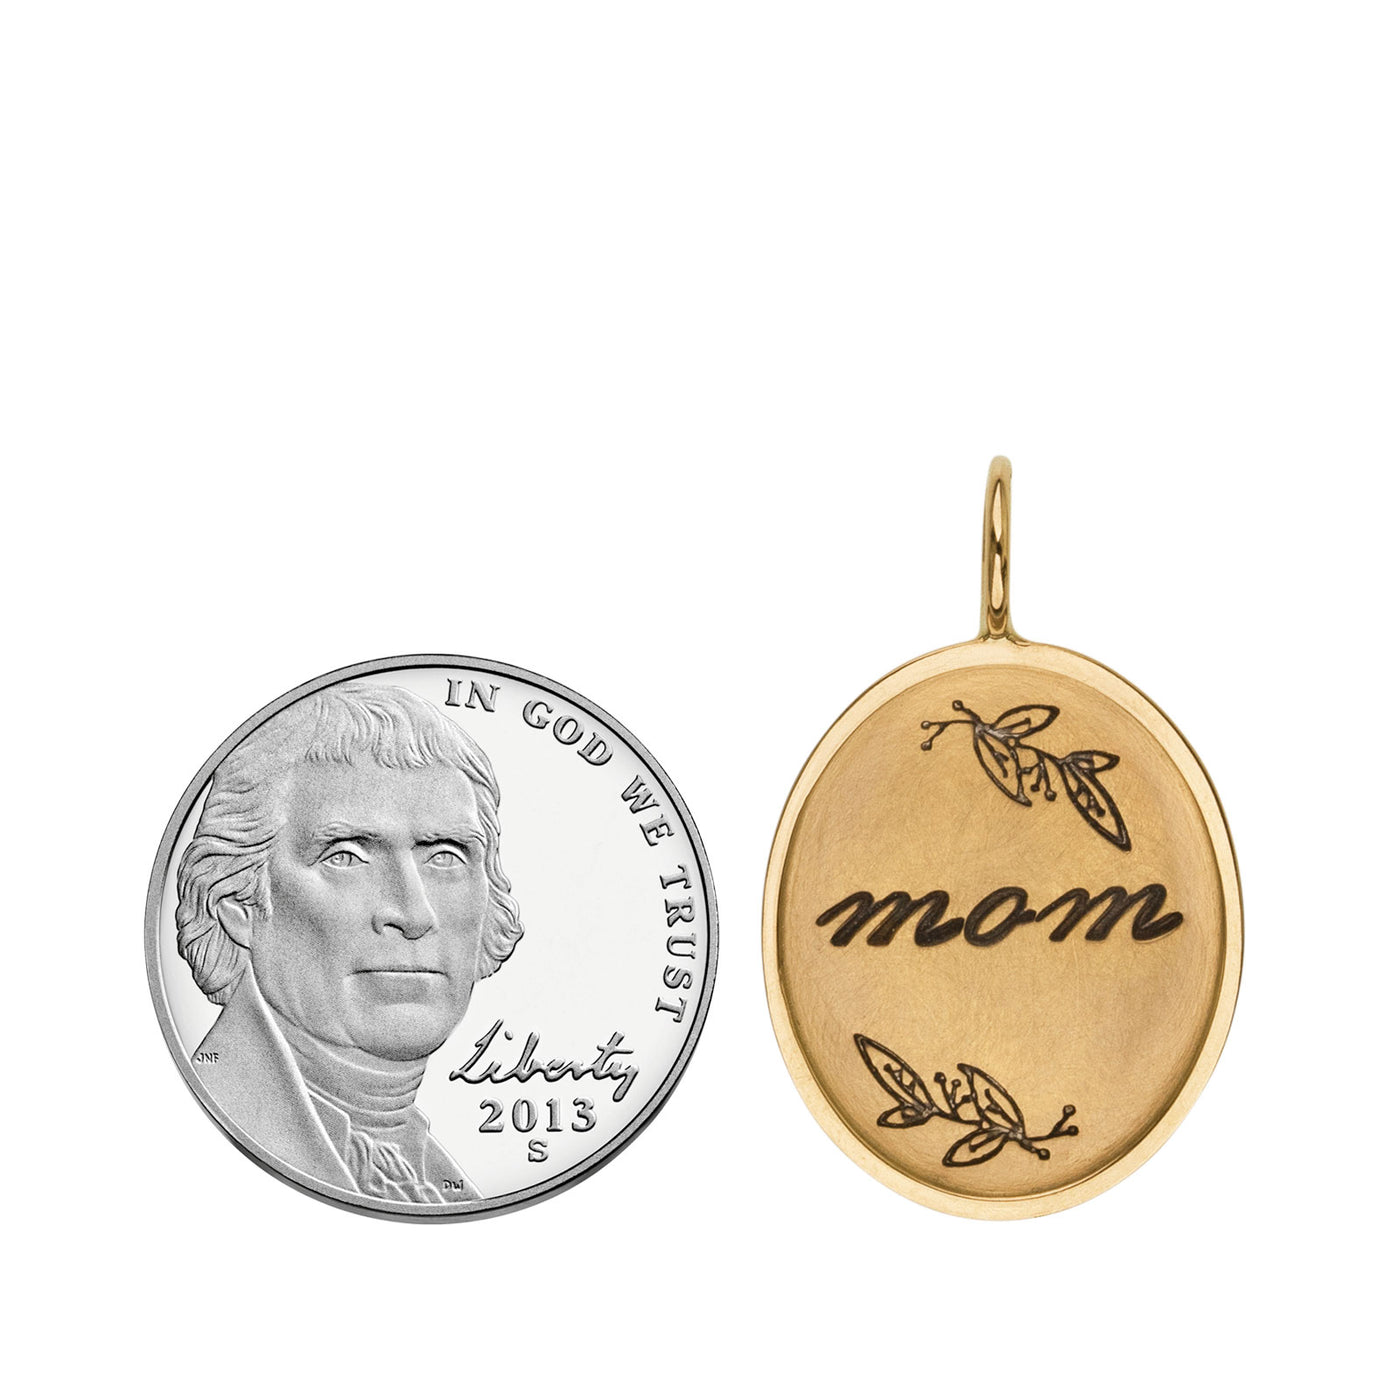 Gold Mom Oval Charm